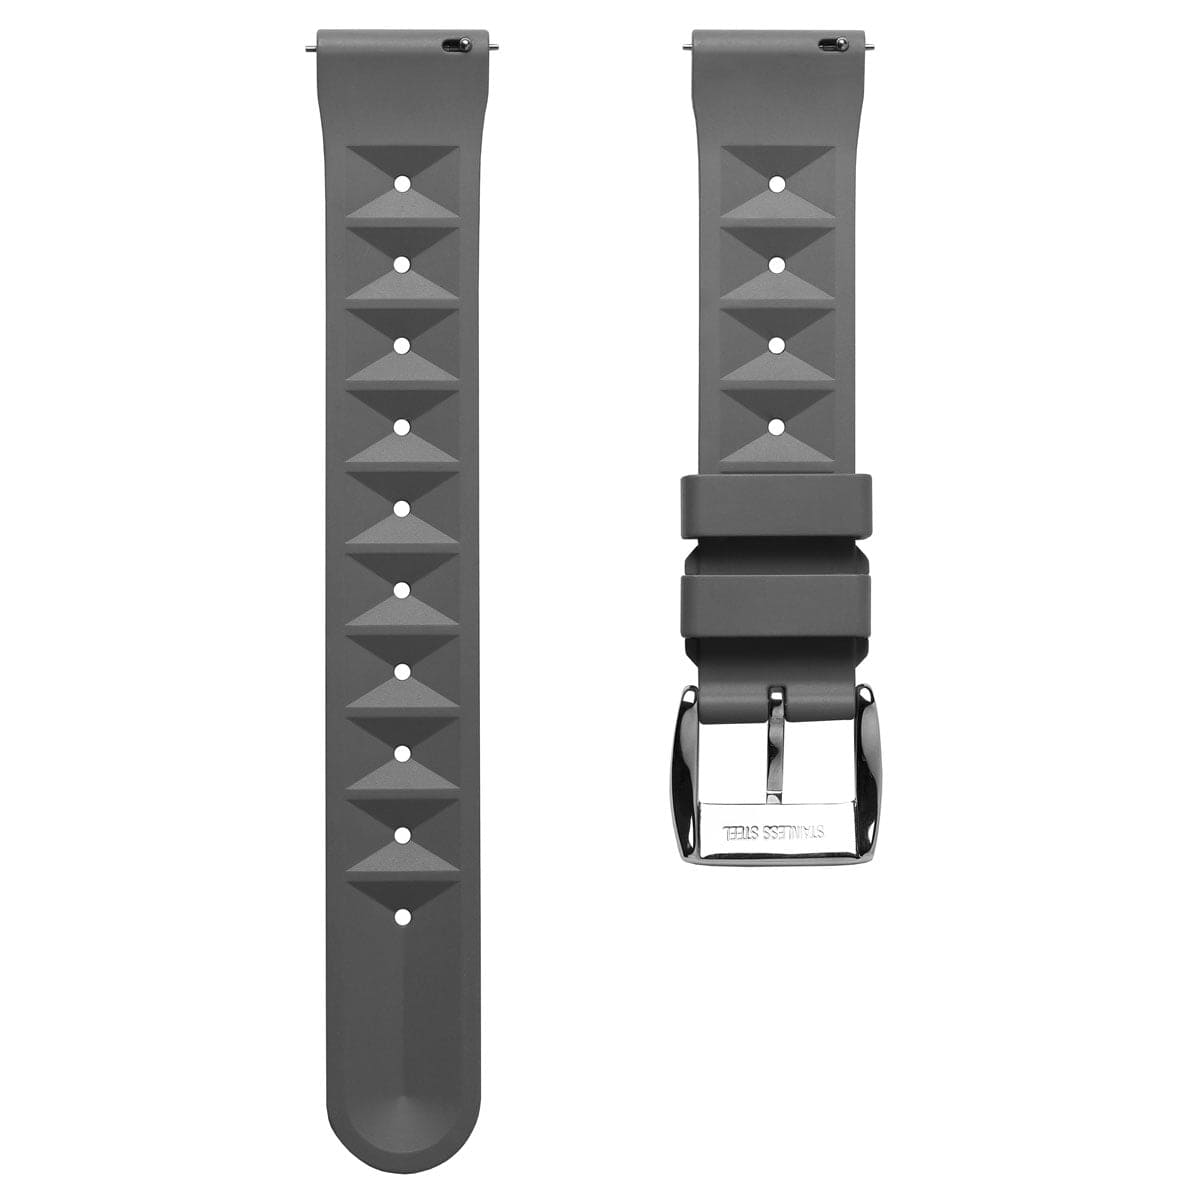 ZULUDIVER Seacroft Waffle FKM Rubber Dive Watch Strap (MkII) - Grey - Brushed Buckle